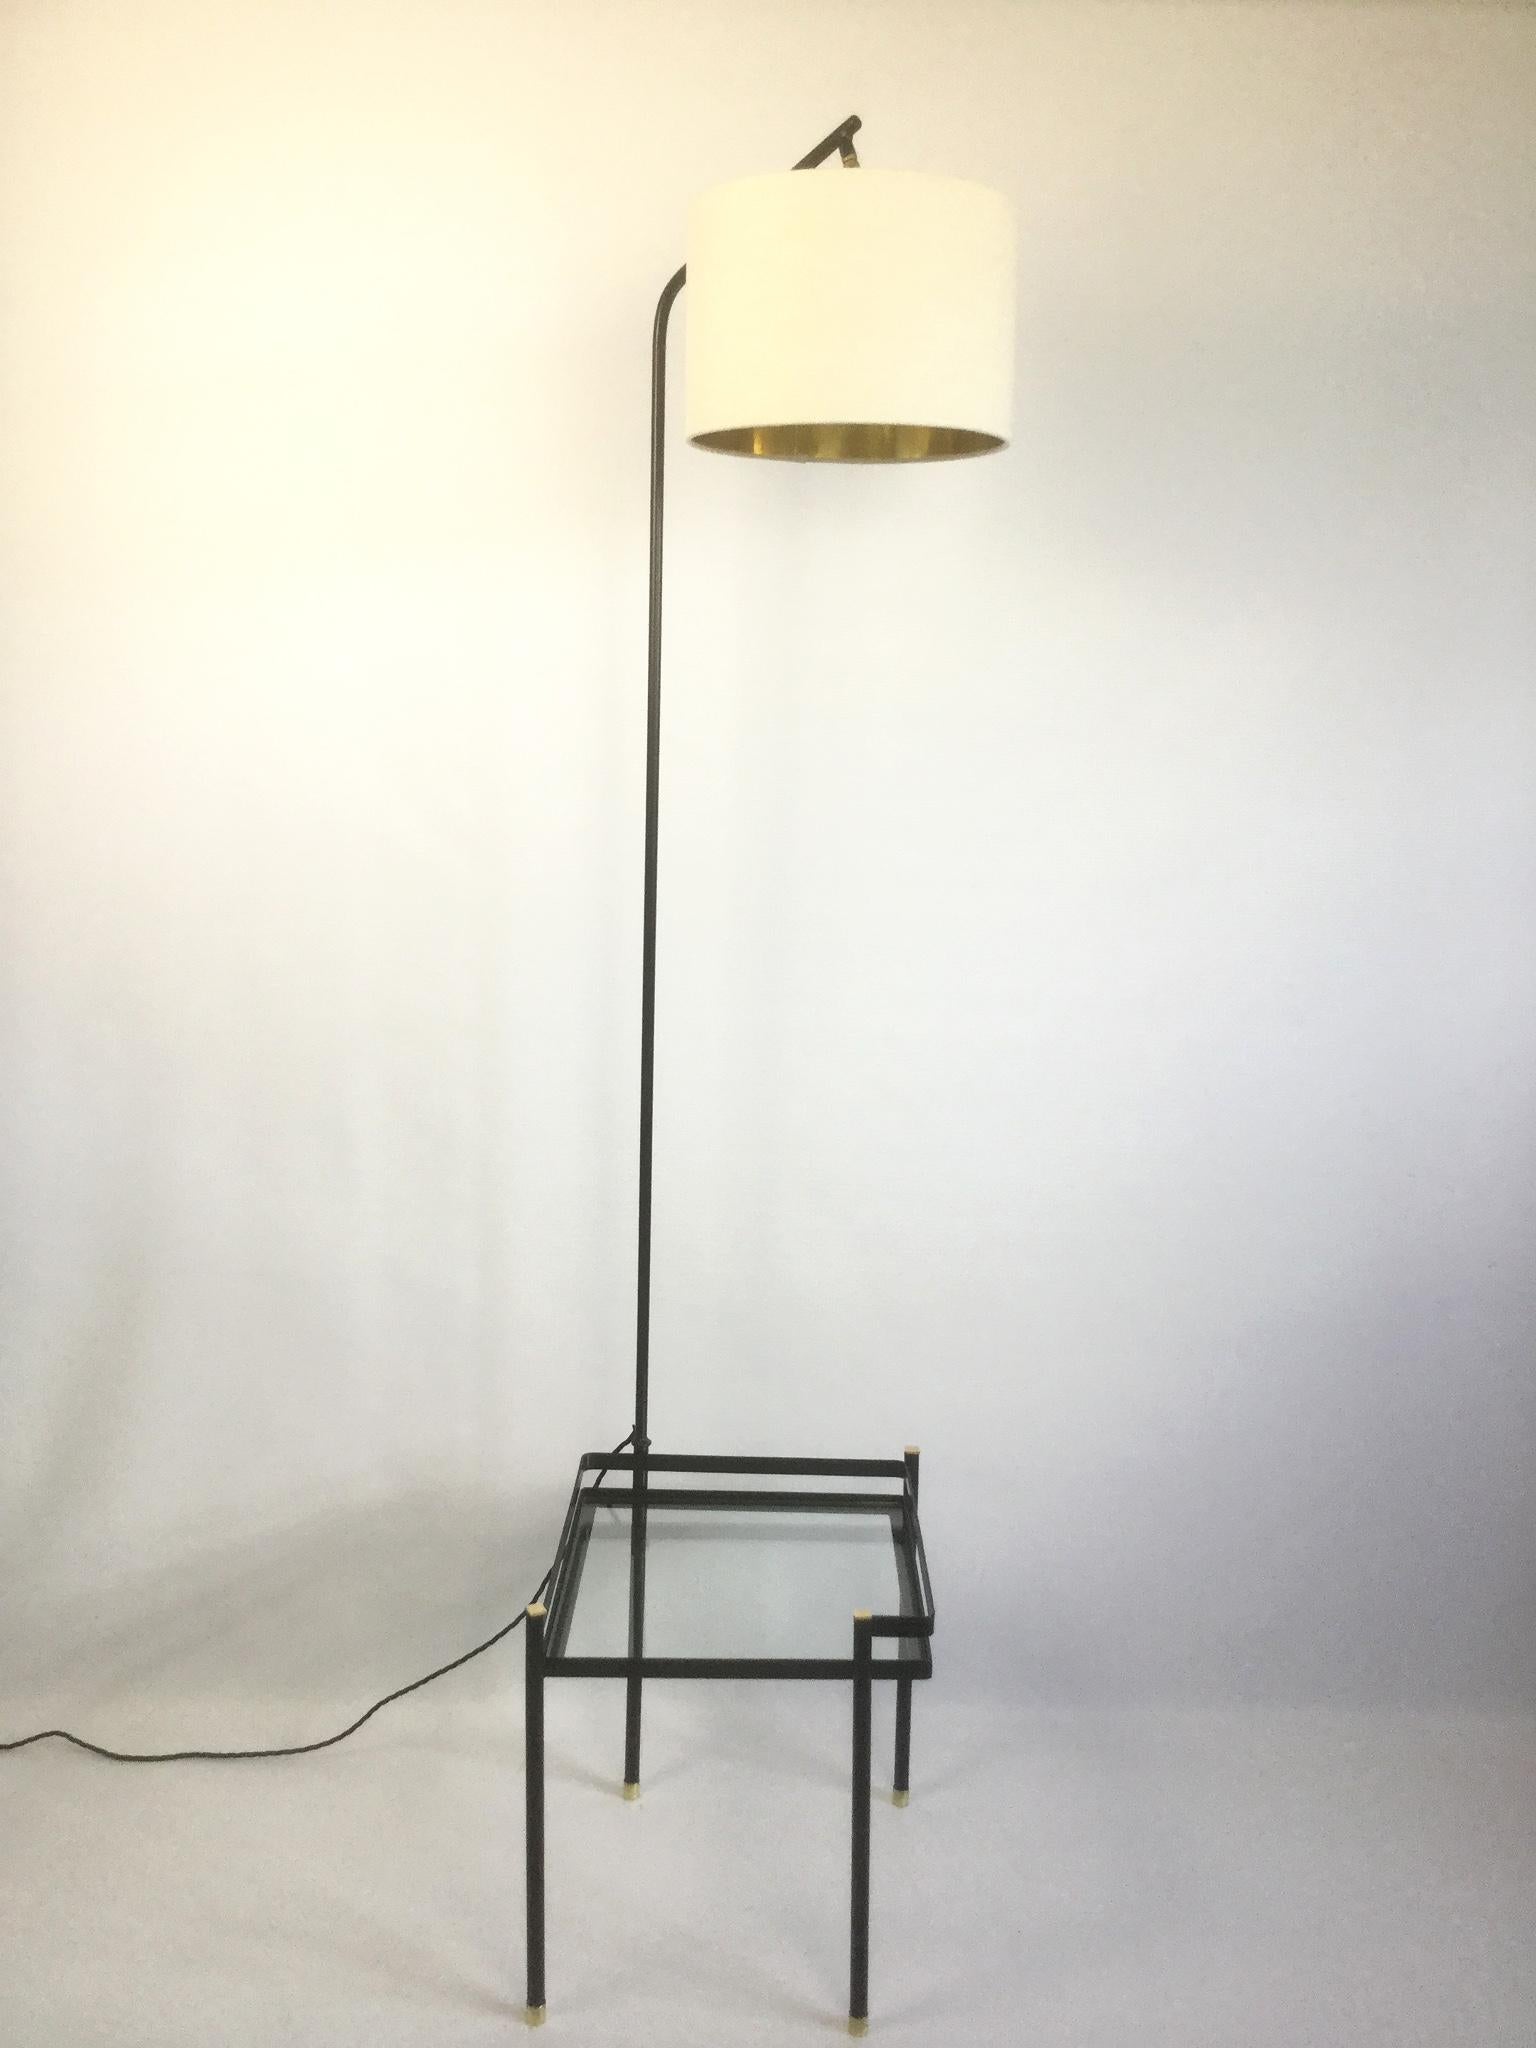 Elegant 1950s, floor lamp with a side table in a spirit of Mathieu Mategot.
The lamp can swivel around the side table.
Recently covered with black enamel paint.
With the original beautiful brass finish on the top and on the table legs
New top